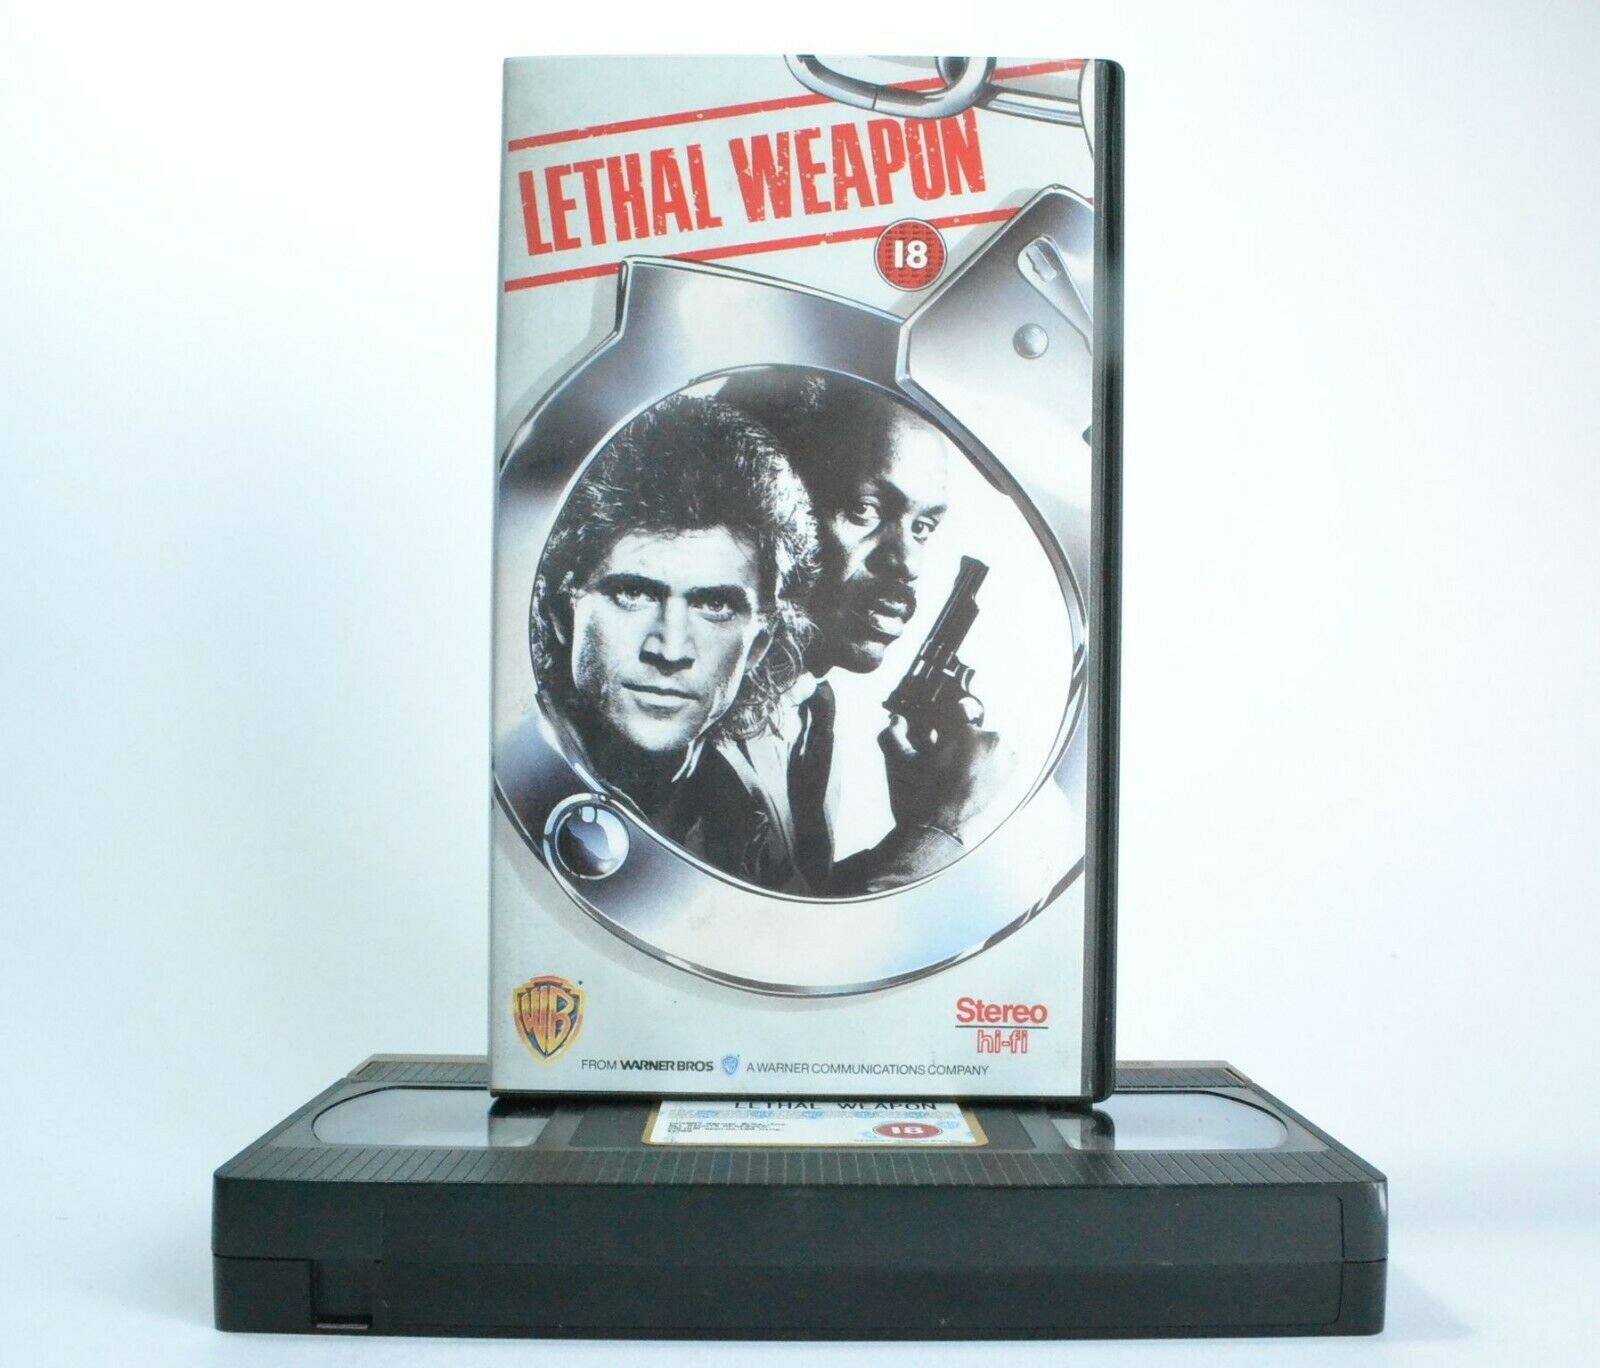 Lethal Weapon: (1987) Warner - Buddy Cop Action Comedy - Mel Gibson - Pal VHS - Golden Class Movies LTD